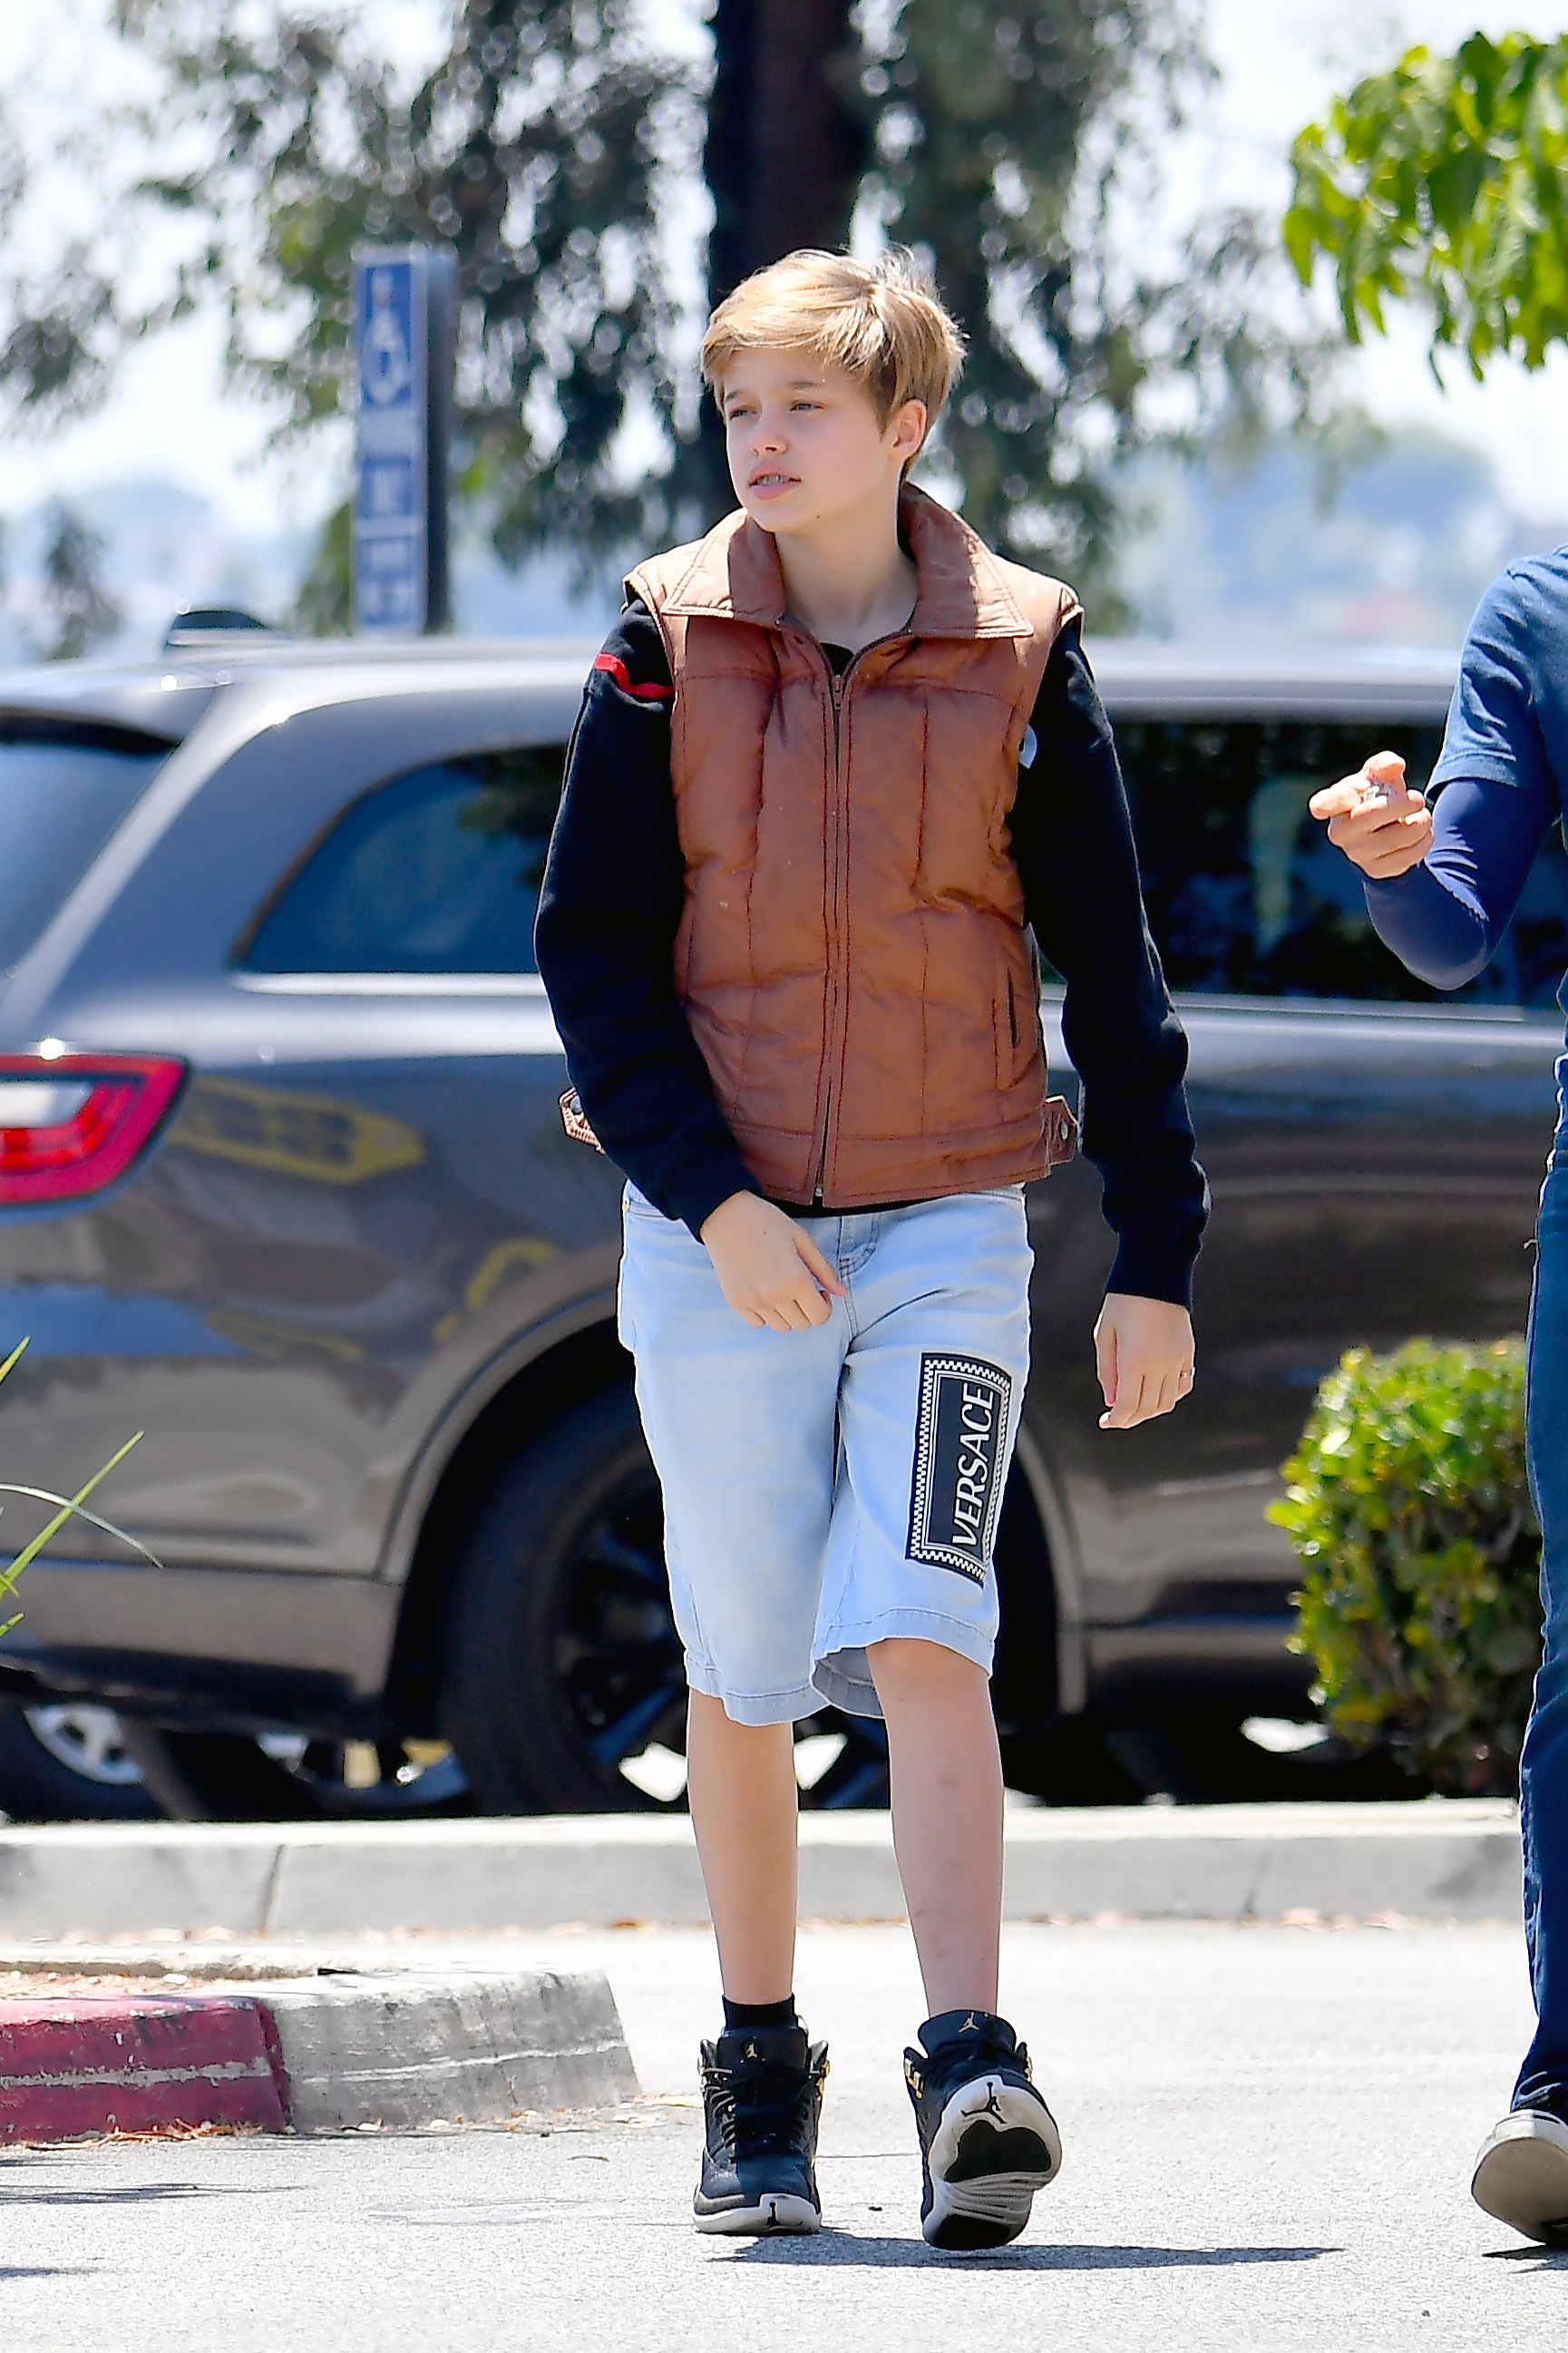 Shiloh Jolie-Pitt Looks Trendy in Shorts, Sneakers Shopping With Angelina